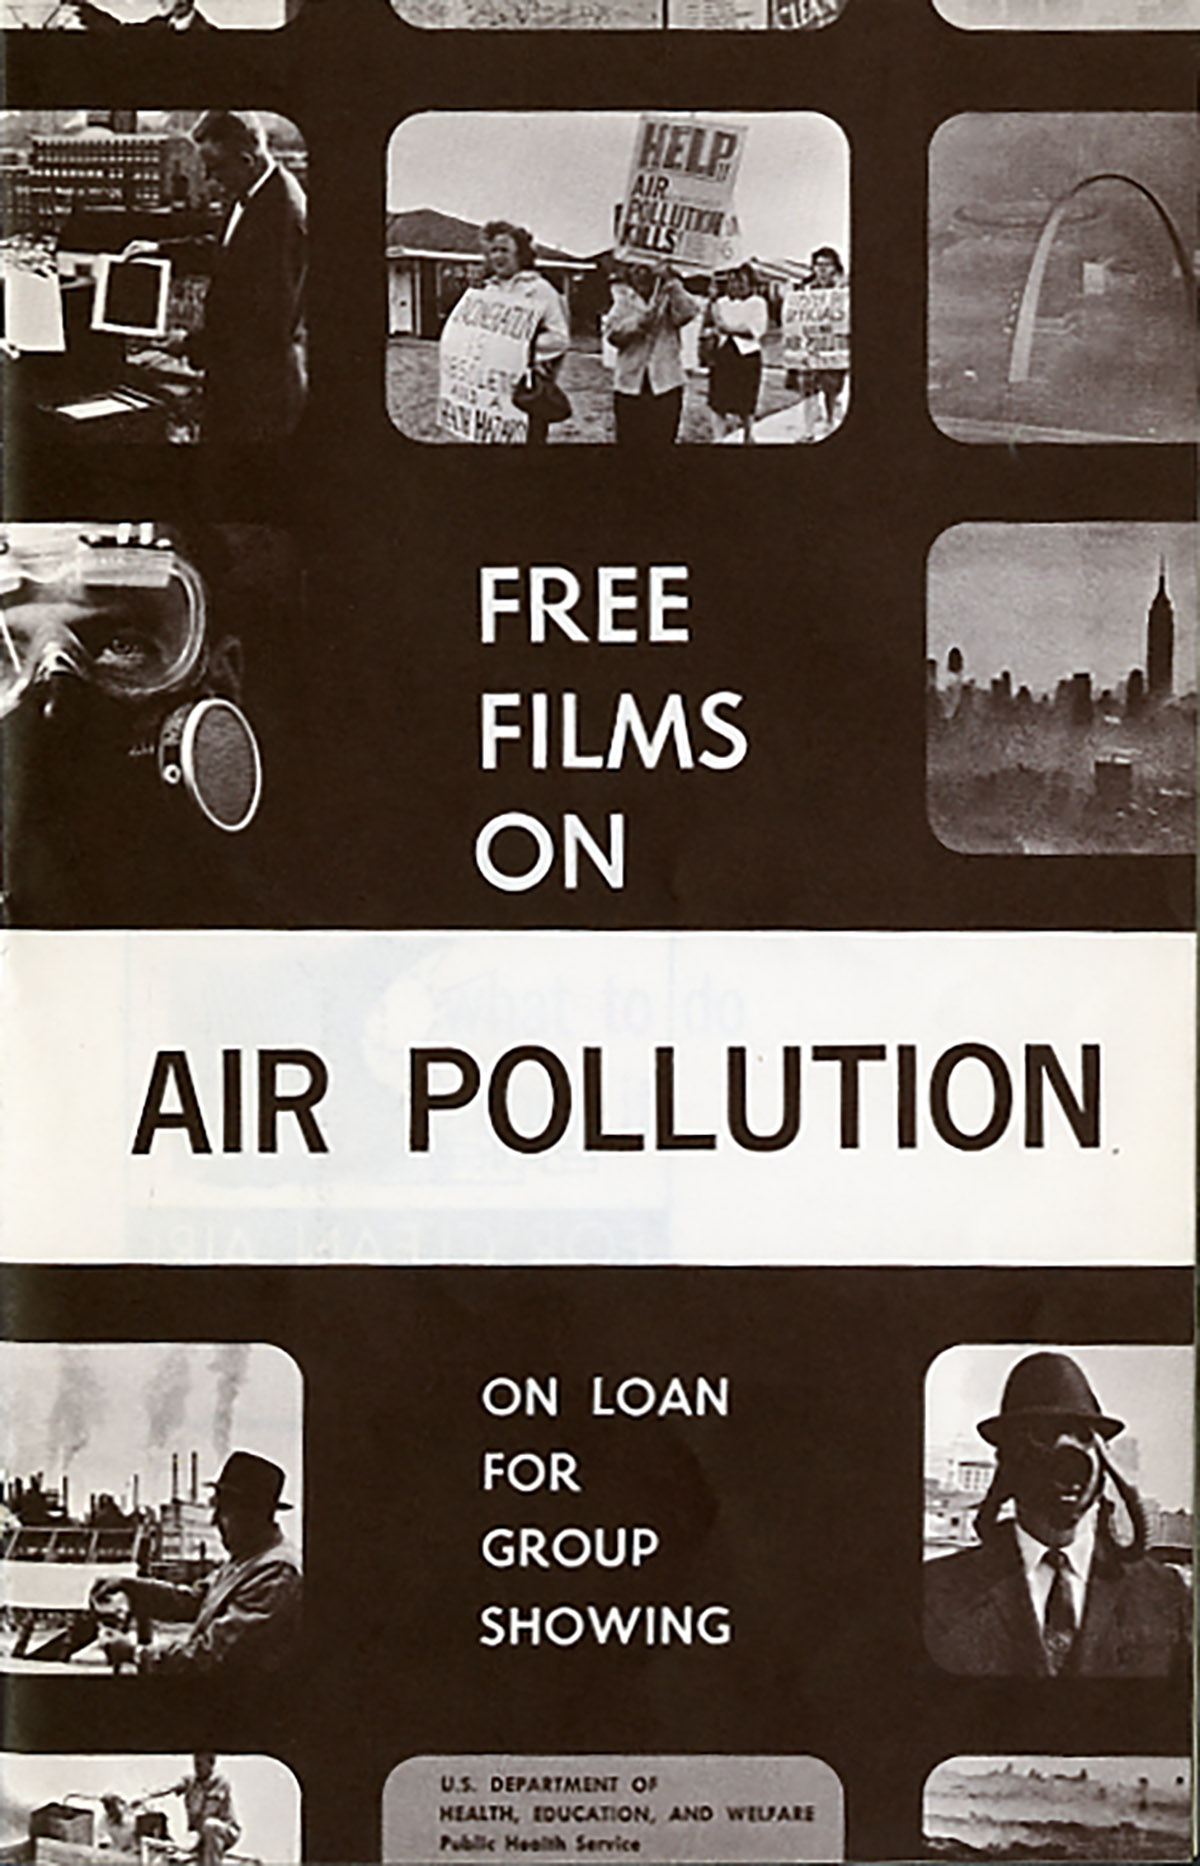 A book cover with black and white film stills.